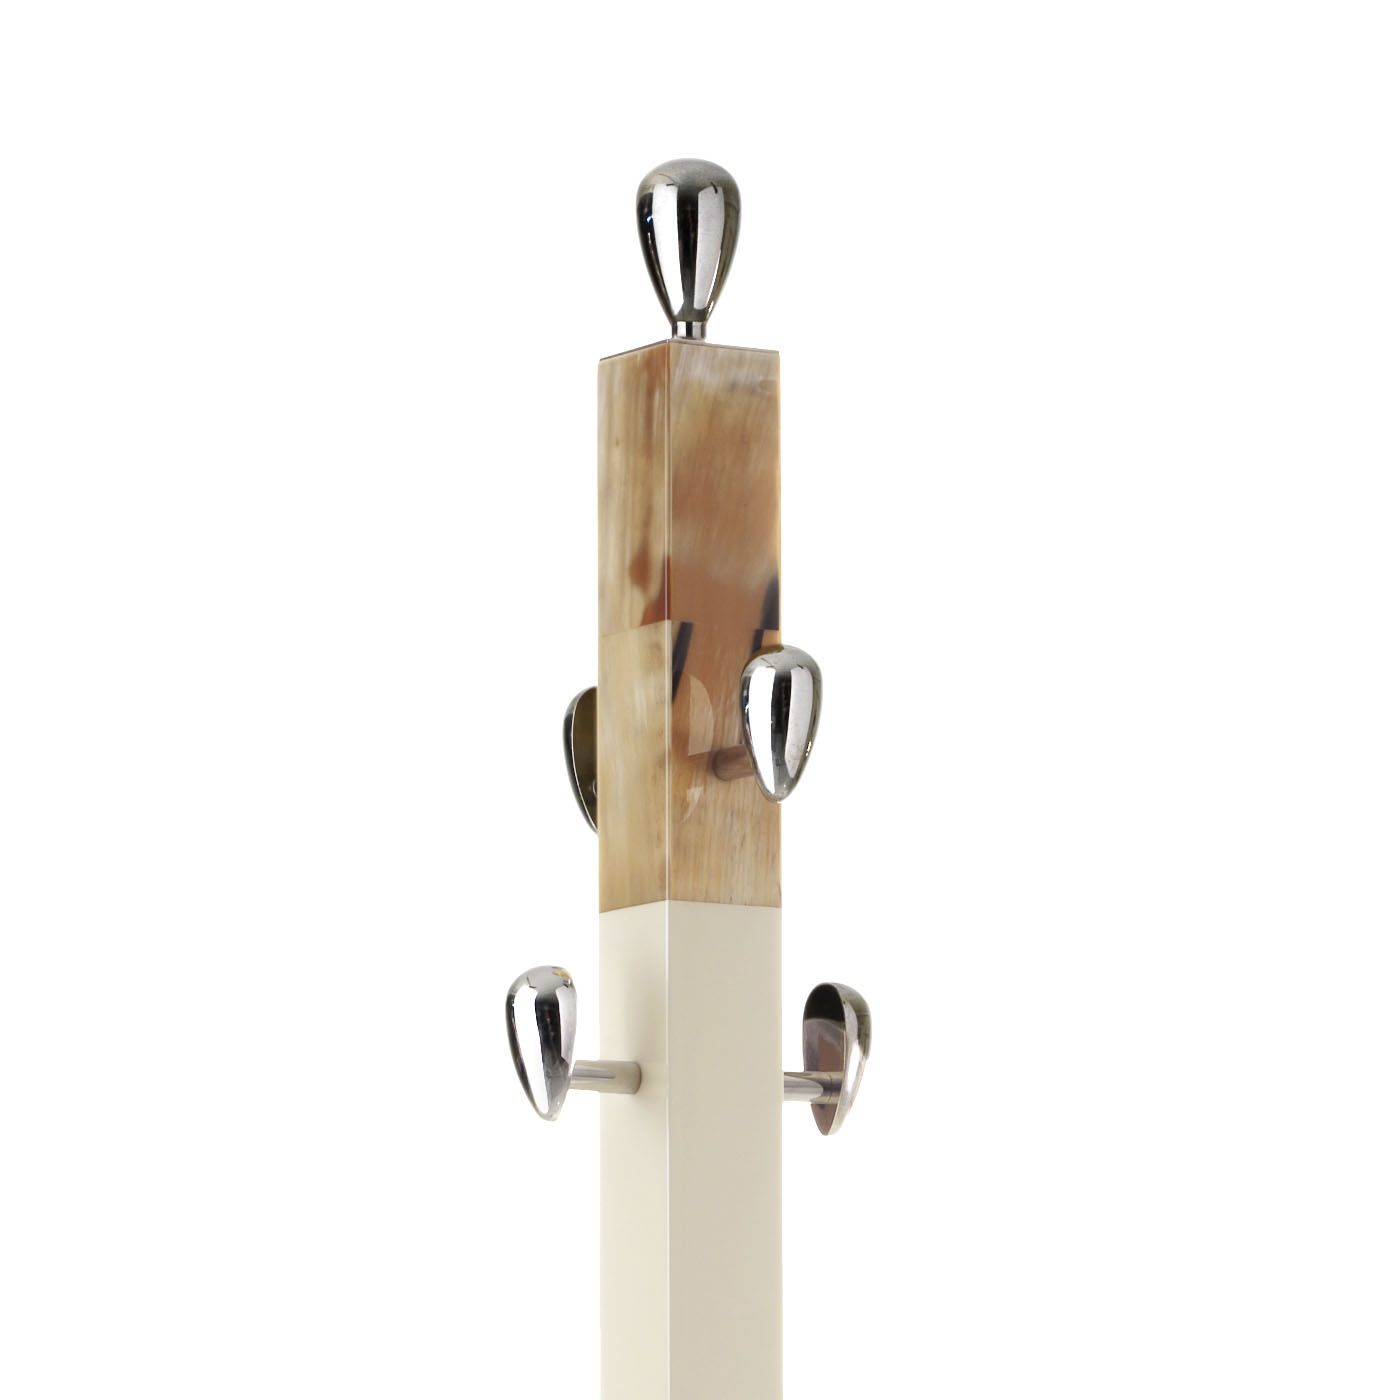 Coat stands and complementary furniture - Giglio coat stand in horn and glossy ivory lacquered wood - detail - Arcahorn